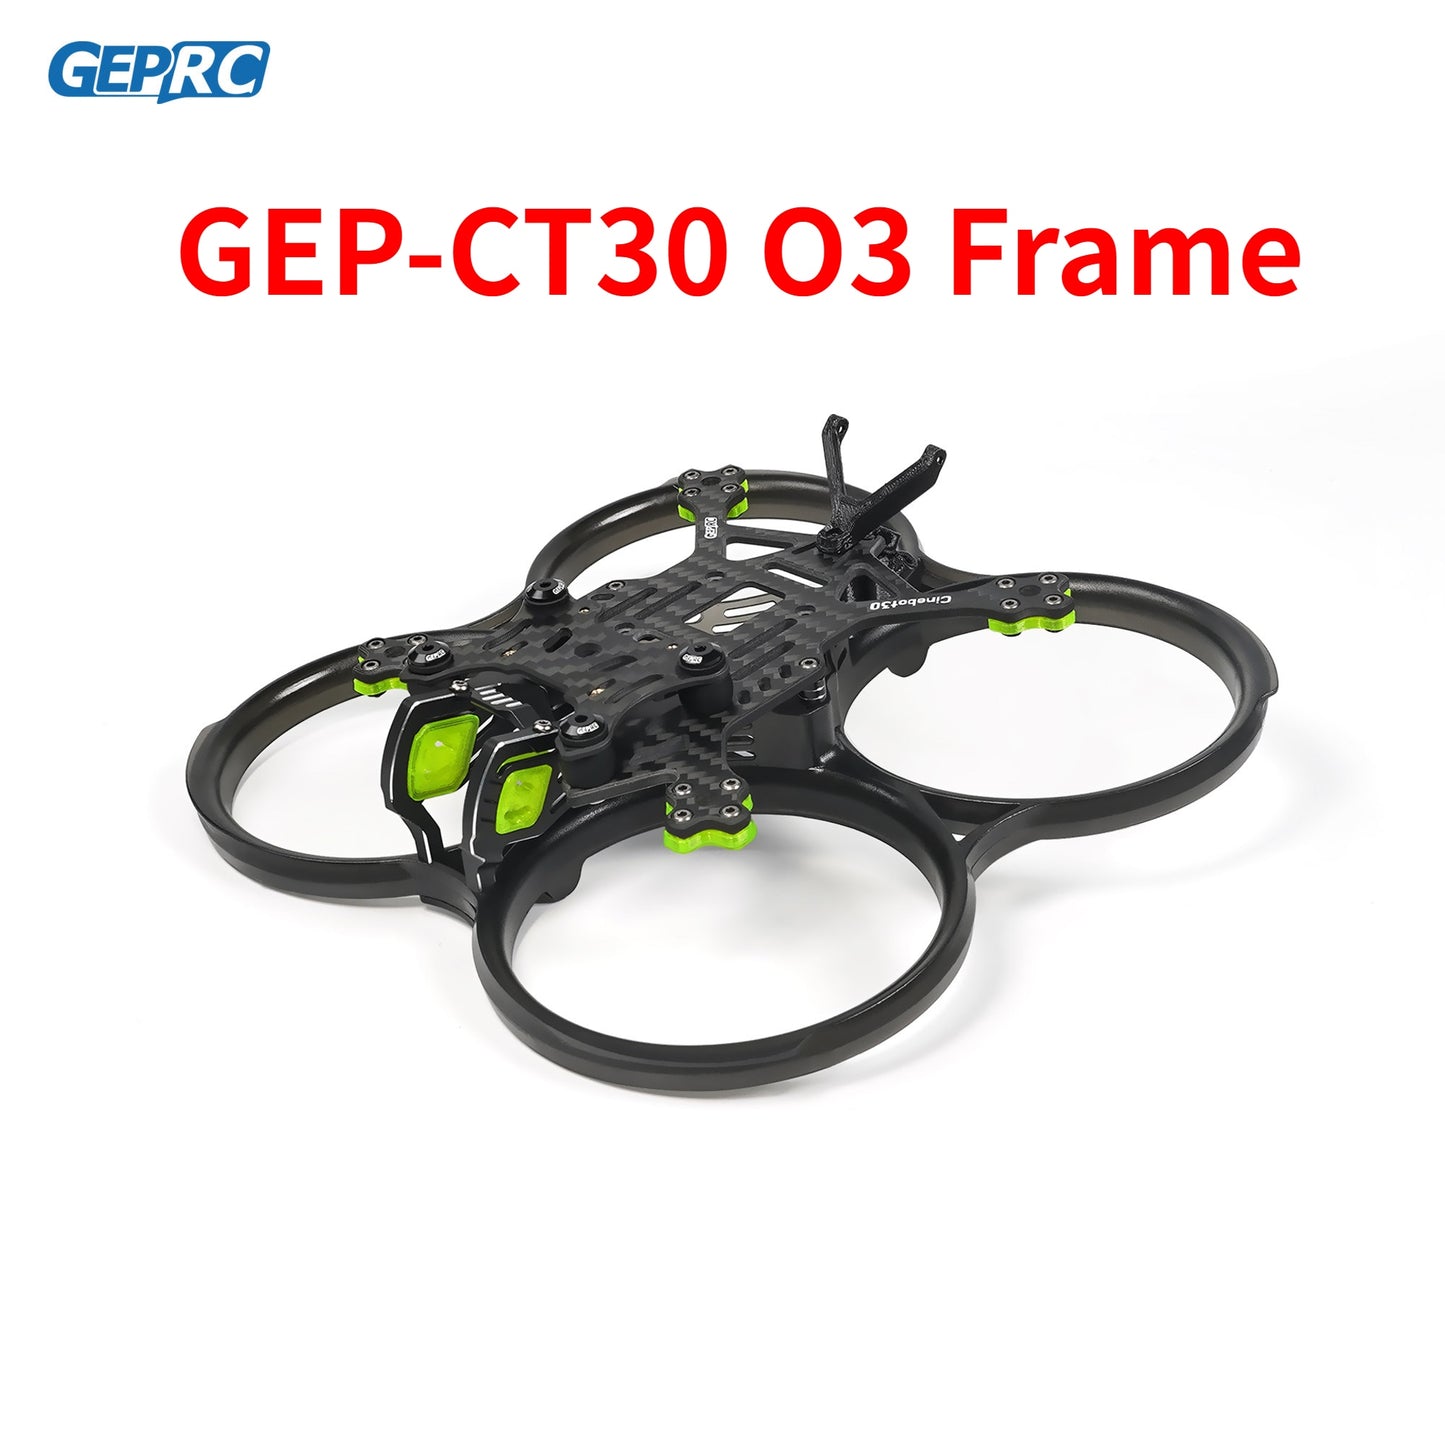 GEPRC GEP-CT30 O3 Frame Parts Cinebot30